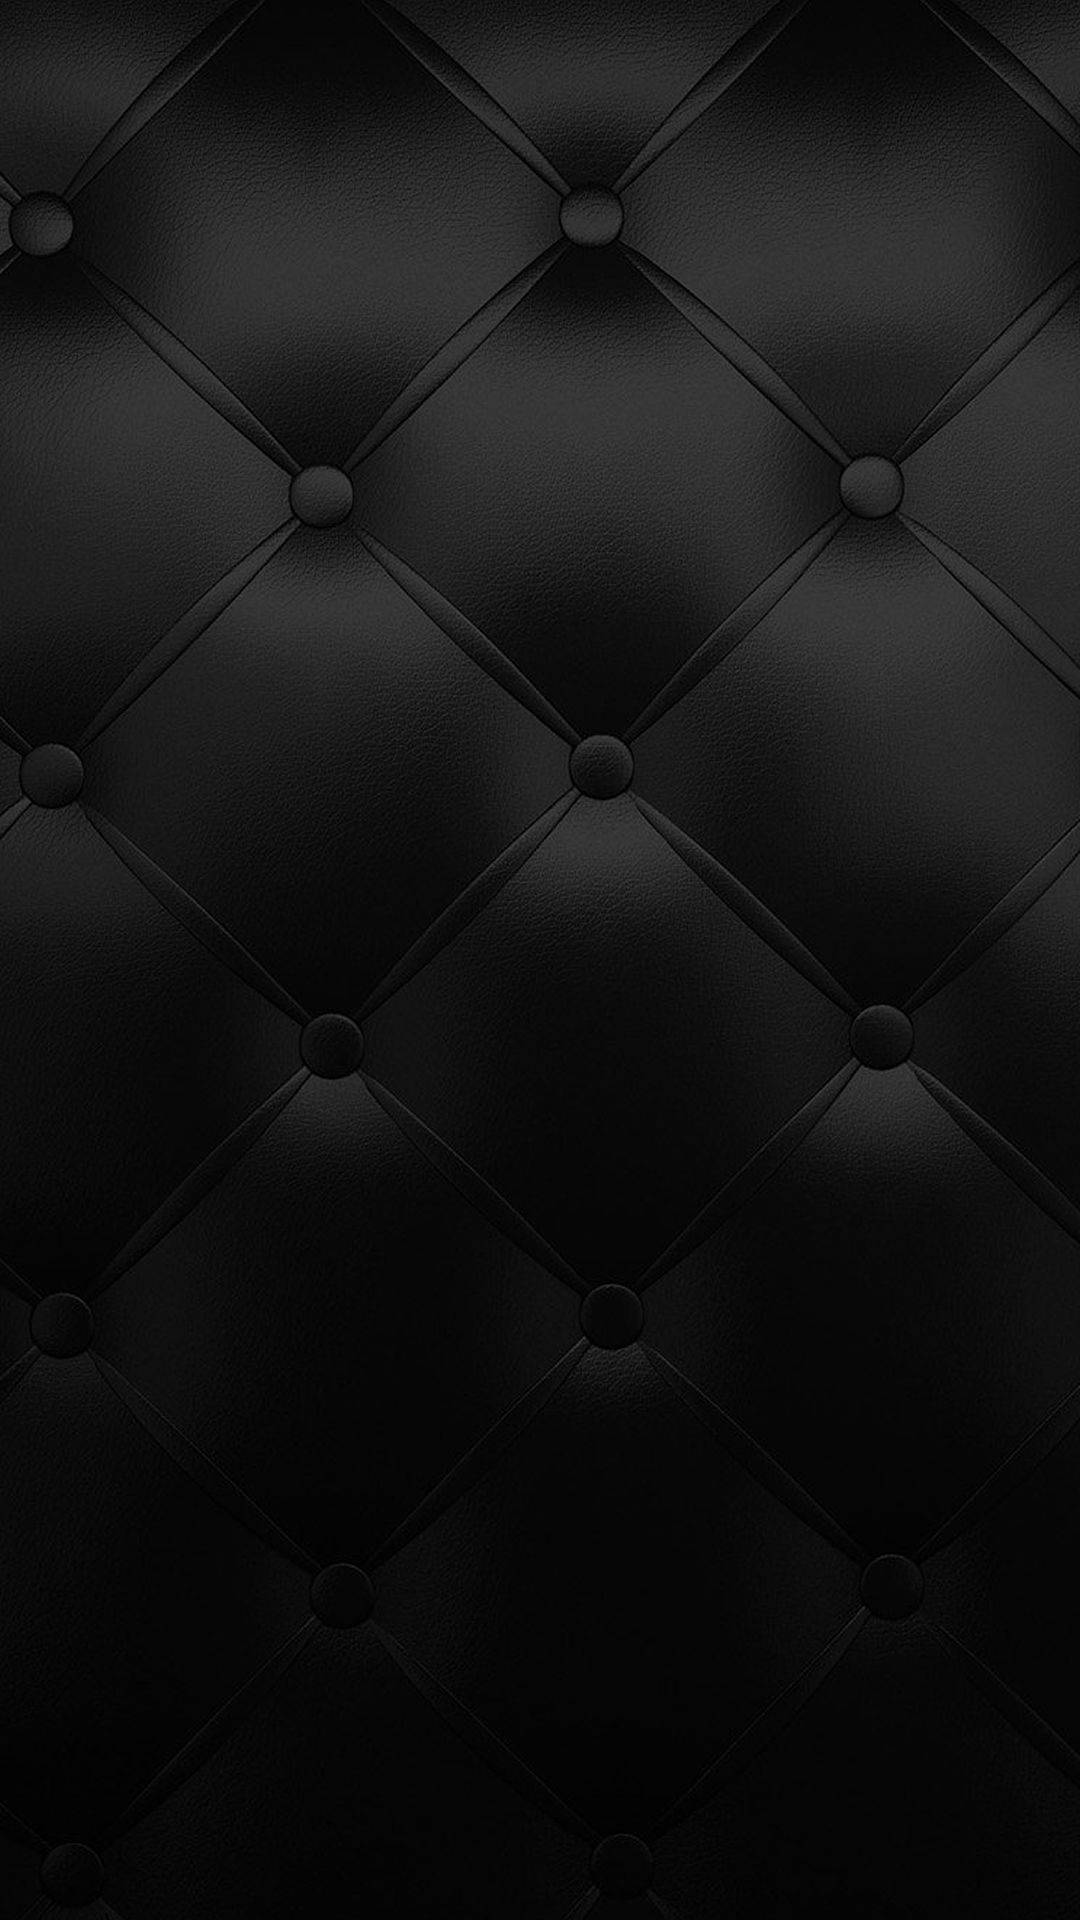 100+] Solid Black Iphone Backgrounds